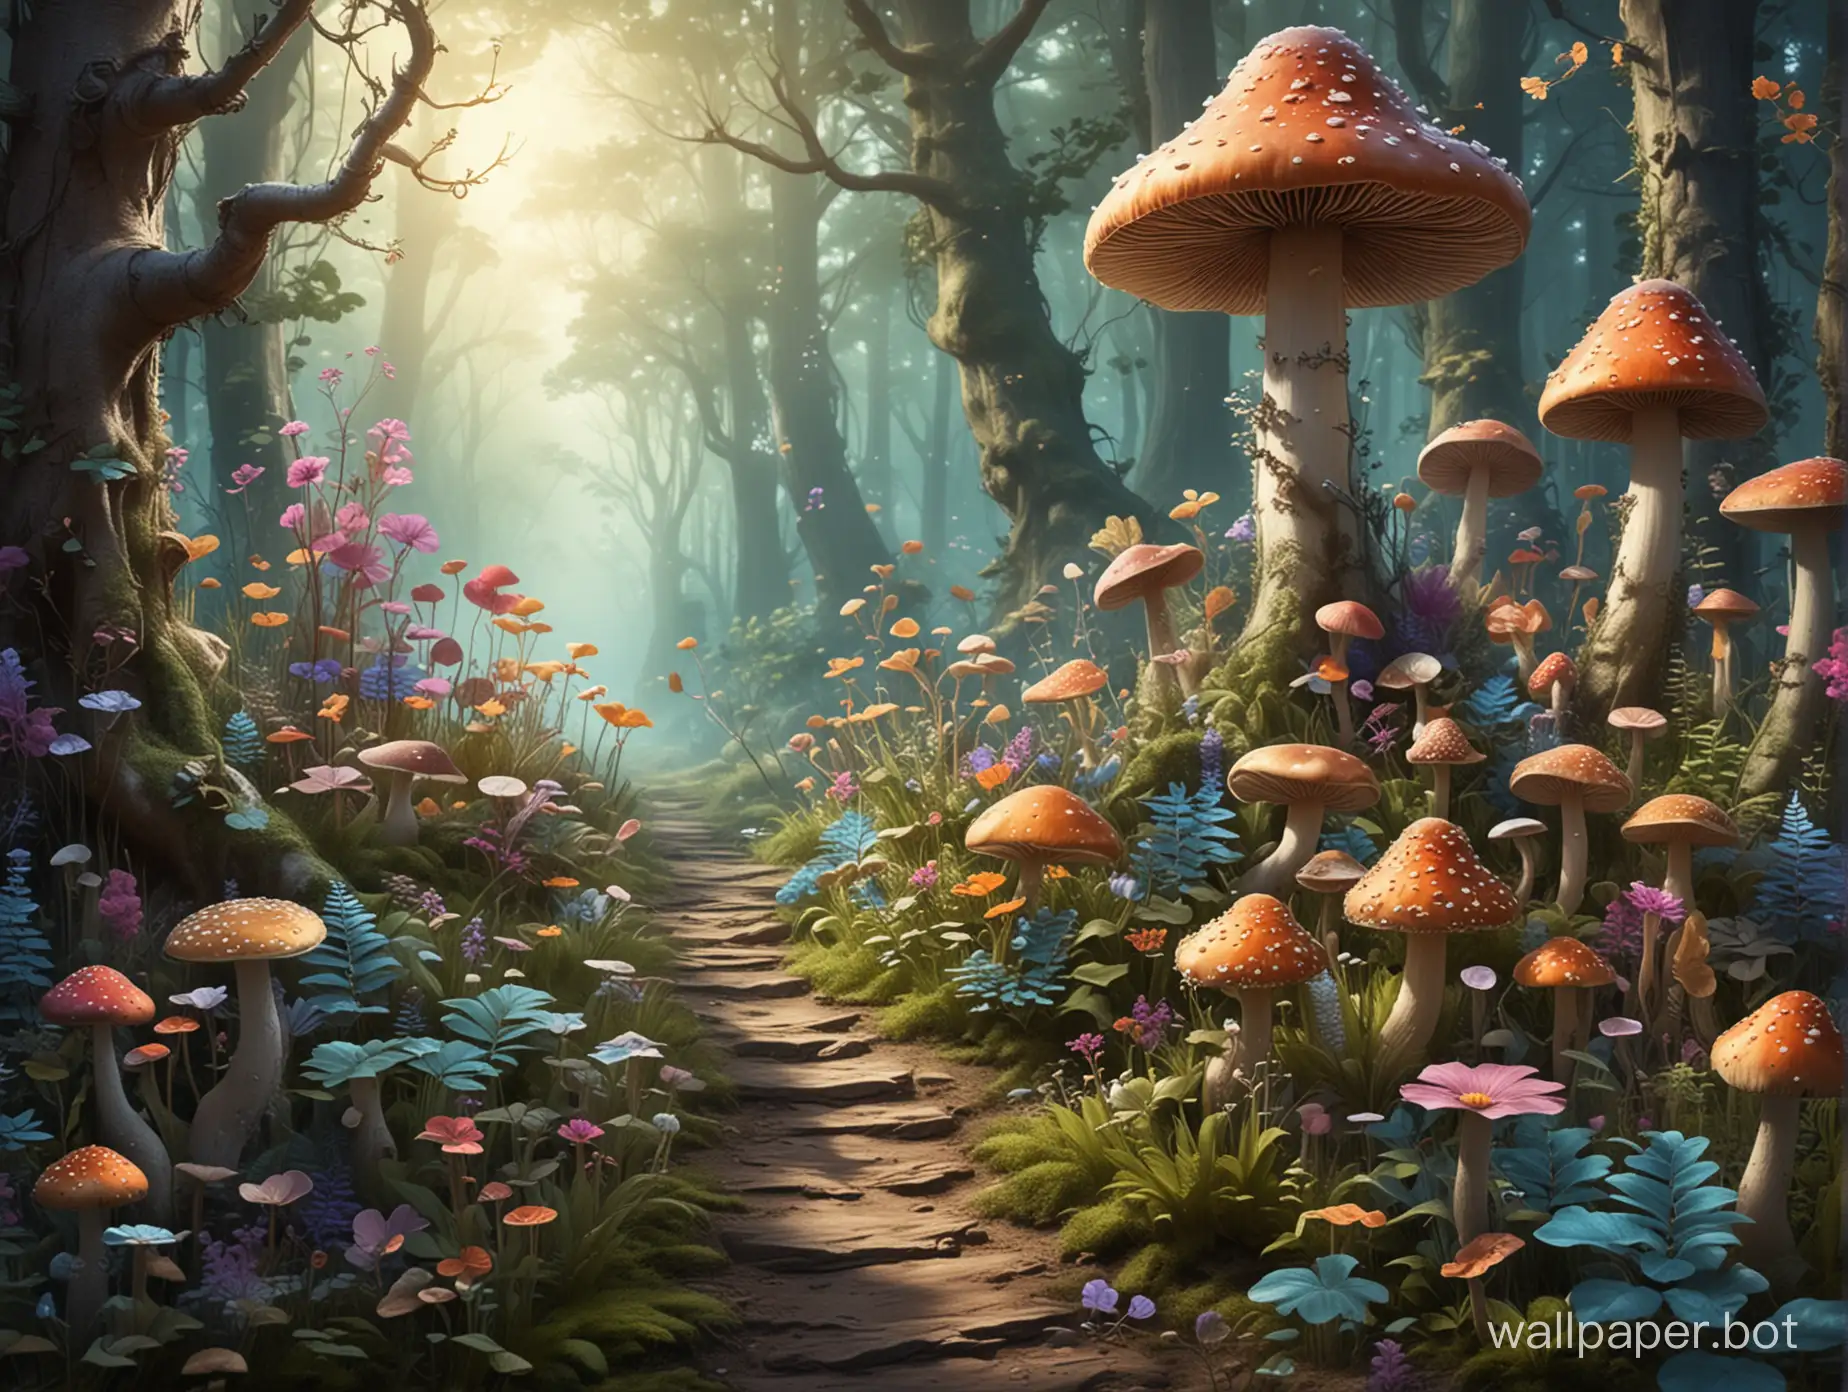 Enchanted-Fantasy-Forest-with-Vibrant-Floral-and-Fungal-Life